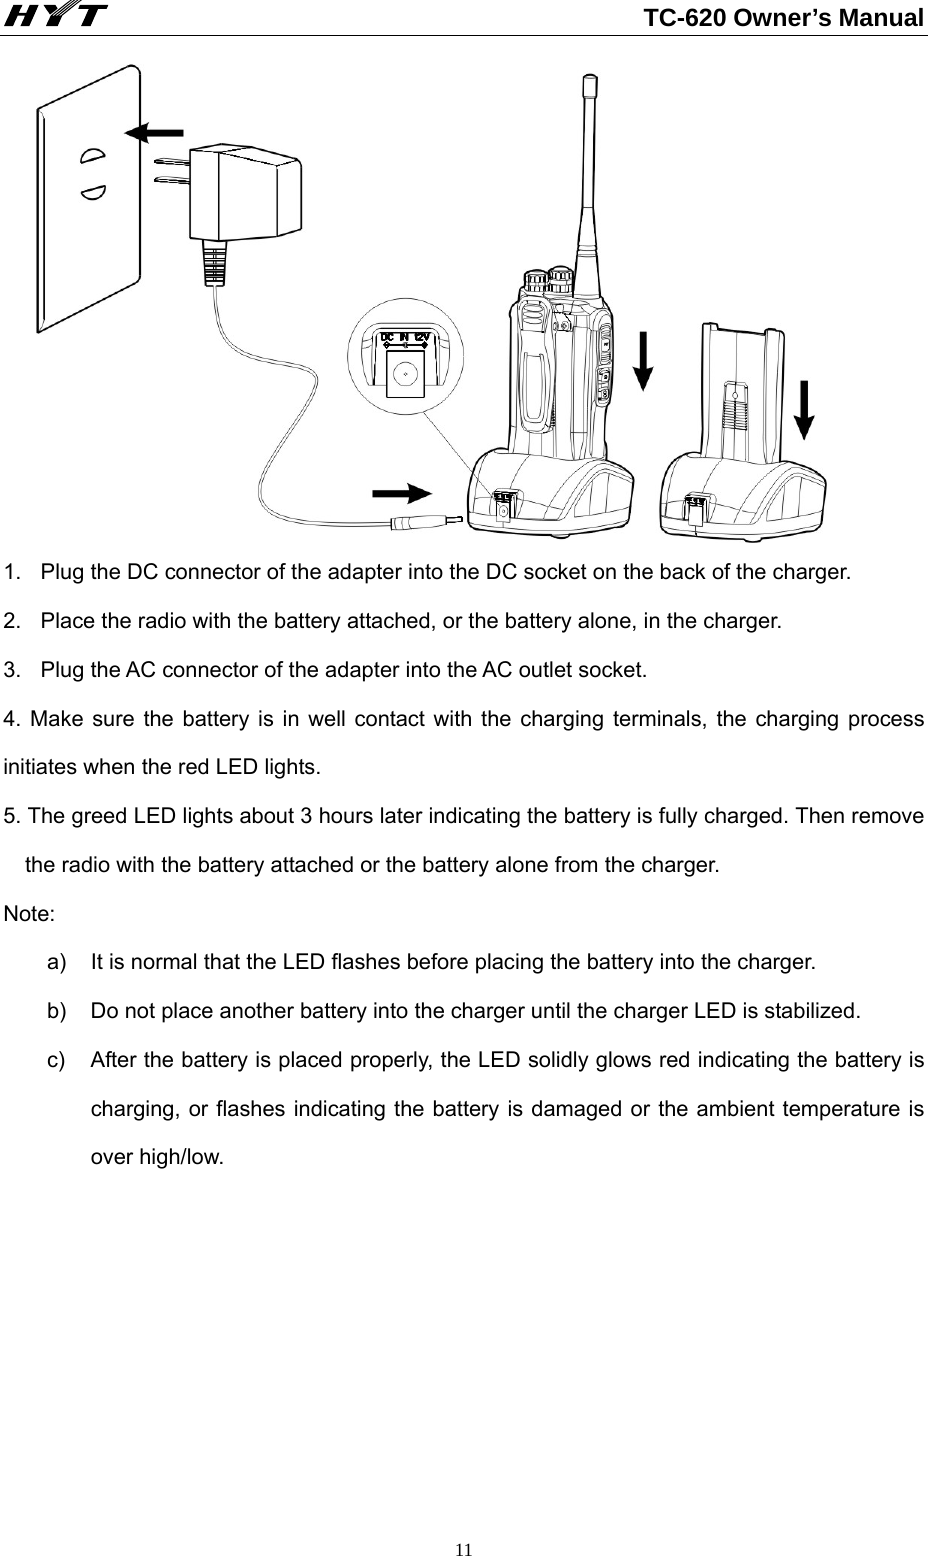                                                          TC-620 Owner’s Manual  11     1.  Plug the DC connector of the adapter into the DC socket on the back of the charger.   2.  Place the radio with the battery attached, or the battery alone, in the charger. 3.  Plug the AC connector of the adapter into the AC outlet socket.   4. Make sure the battery is in well contact with the charging terminals, the charging process initiates when the red LED lights.     5. The greed LED lights about 3 hours later indicating the battery is fully charged. Then remove the radio with the battery attached or the battery alone from the charger. Note:  a)  It is normal that the LED flashes before placing the battery into the charger. b)  Do not place another battery into the charger until the charger LED is stabilized. c)  After the battery is placed properly, the LED solidly glows red indicating the battery is charging, or flashes indicating the battery is damaged or the ambient temperature is over high/low.       